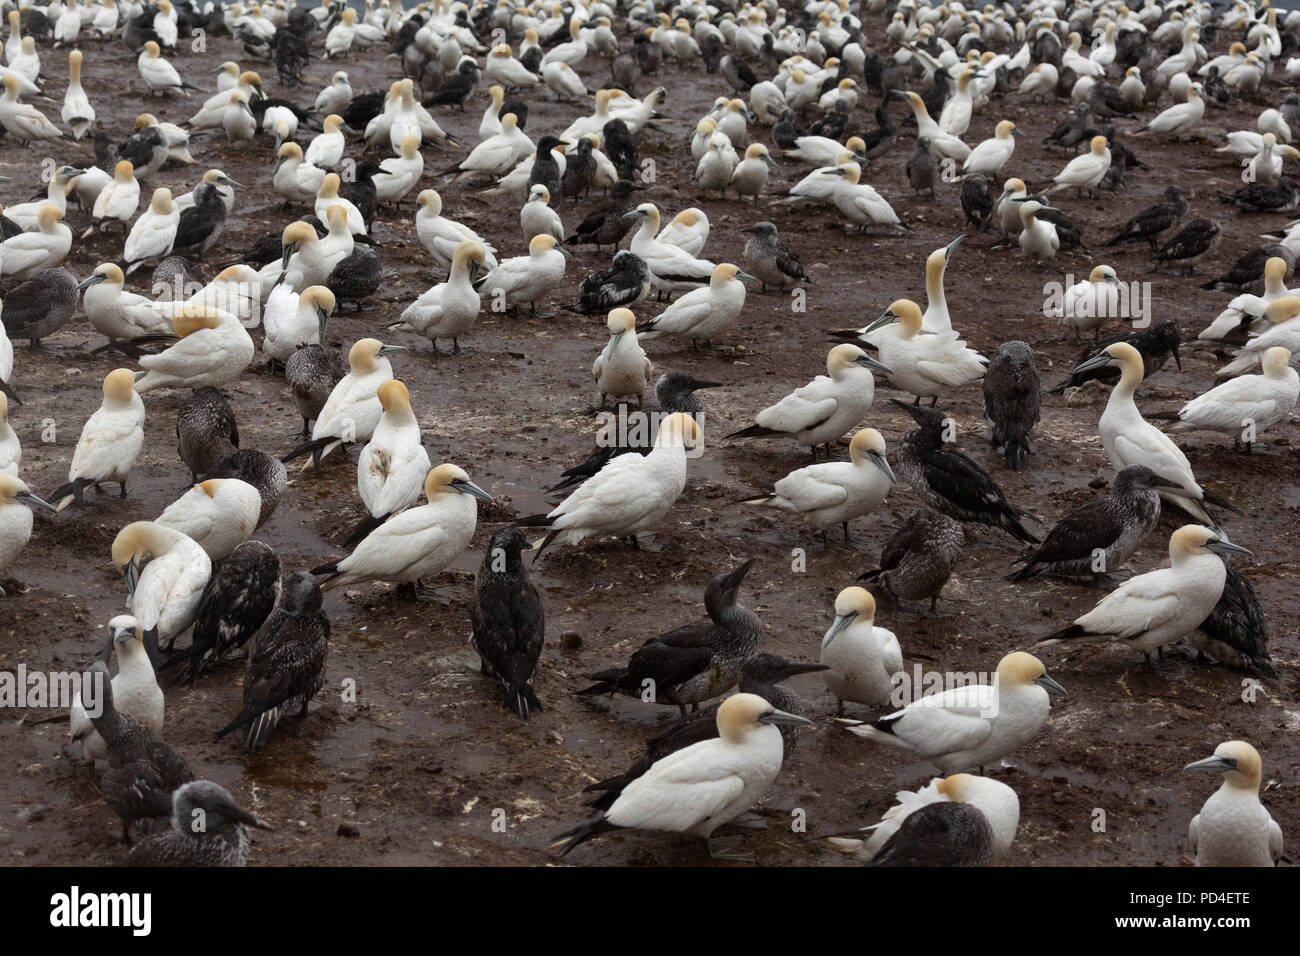 Northern gannets (Morus bassanus) on Bonaventure Island, Canada. The island is home to one of the world's largest northern gannet colonies. Stock Photo